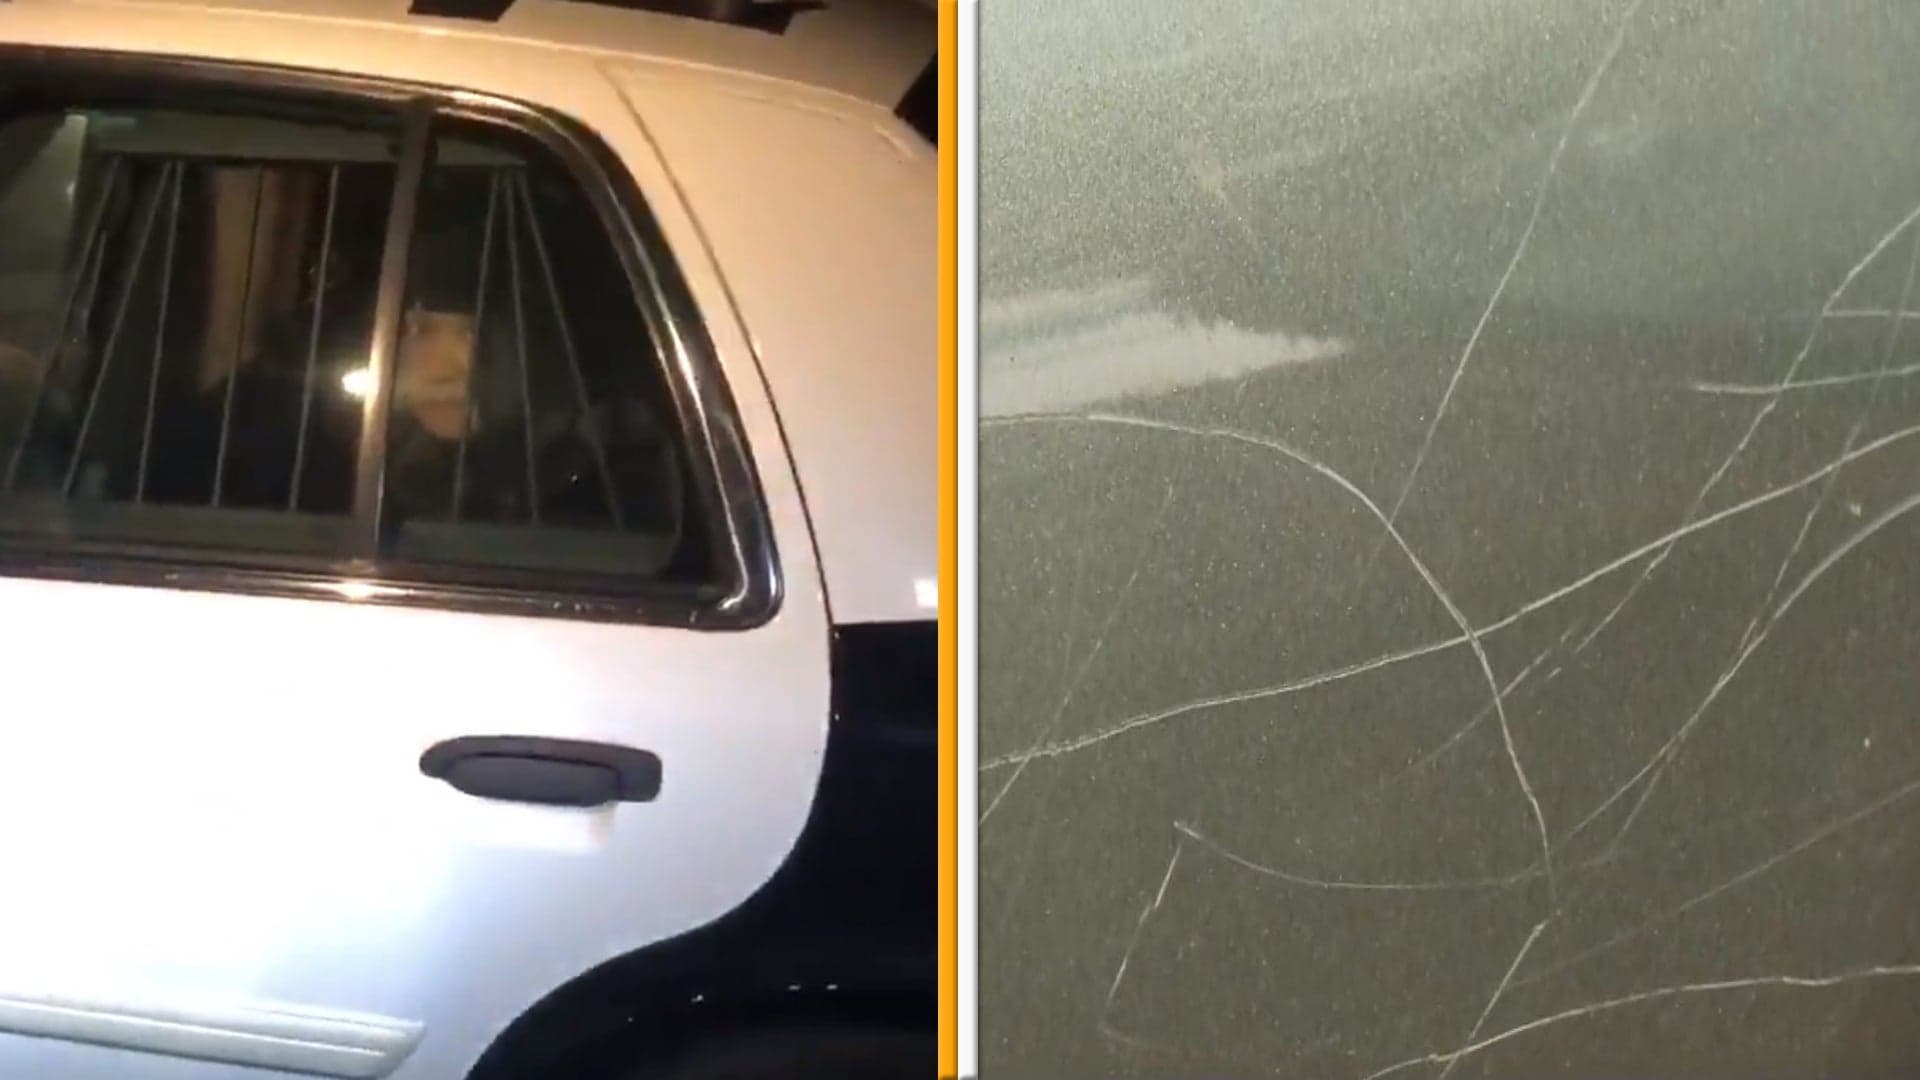 Elderly Woman Blamed for Keying ‘Dozens’ of Cars in Month-Long Spree